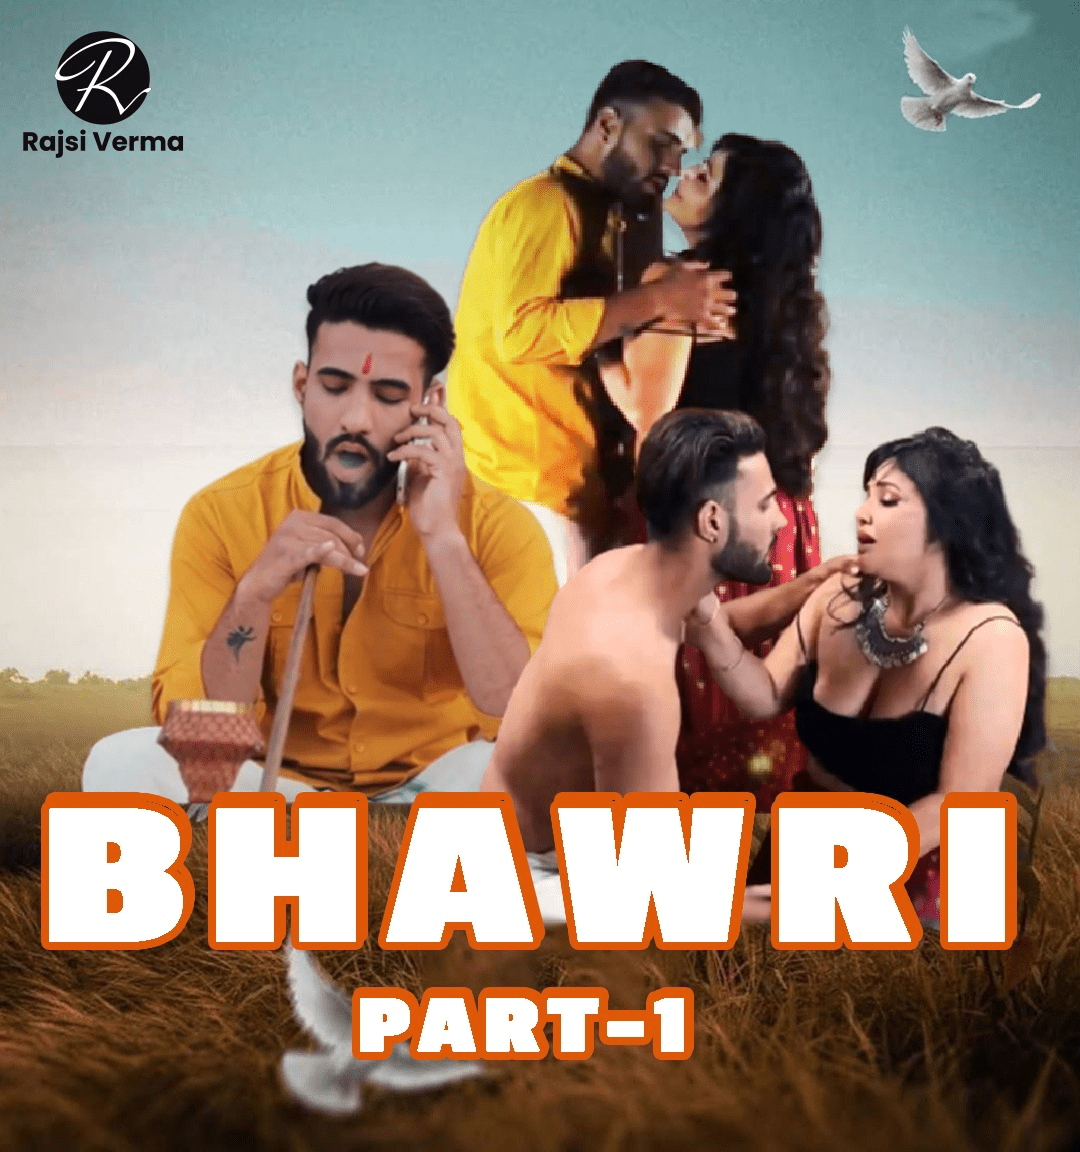 You are currently viewing Bhawri 2021 Rajsi Verma App Hindi S01E01 Hot Web Series 720p HDRip 150MB Download & Watch Online